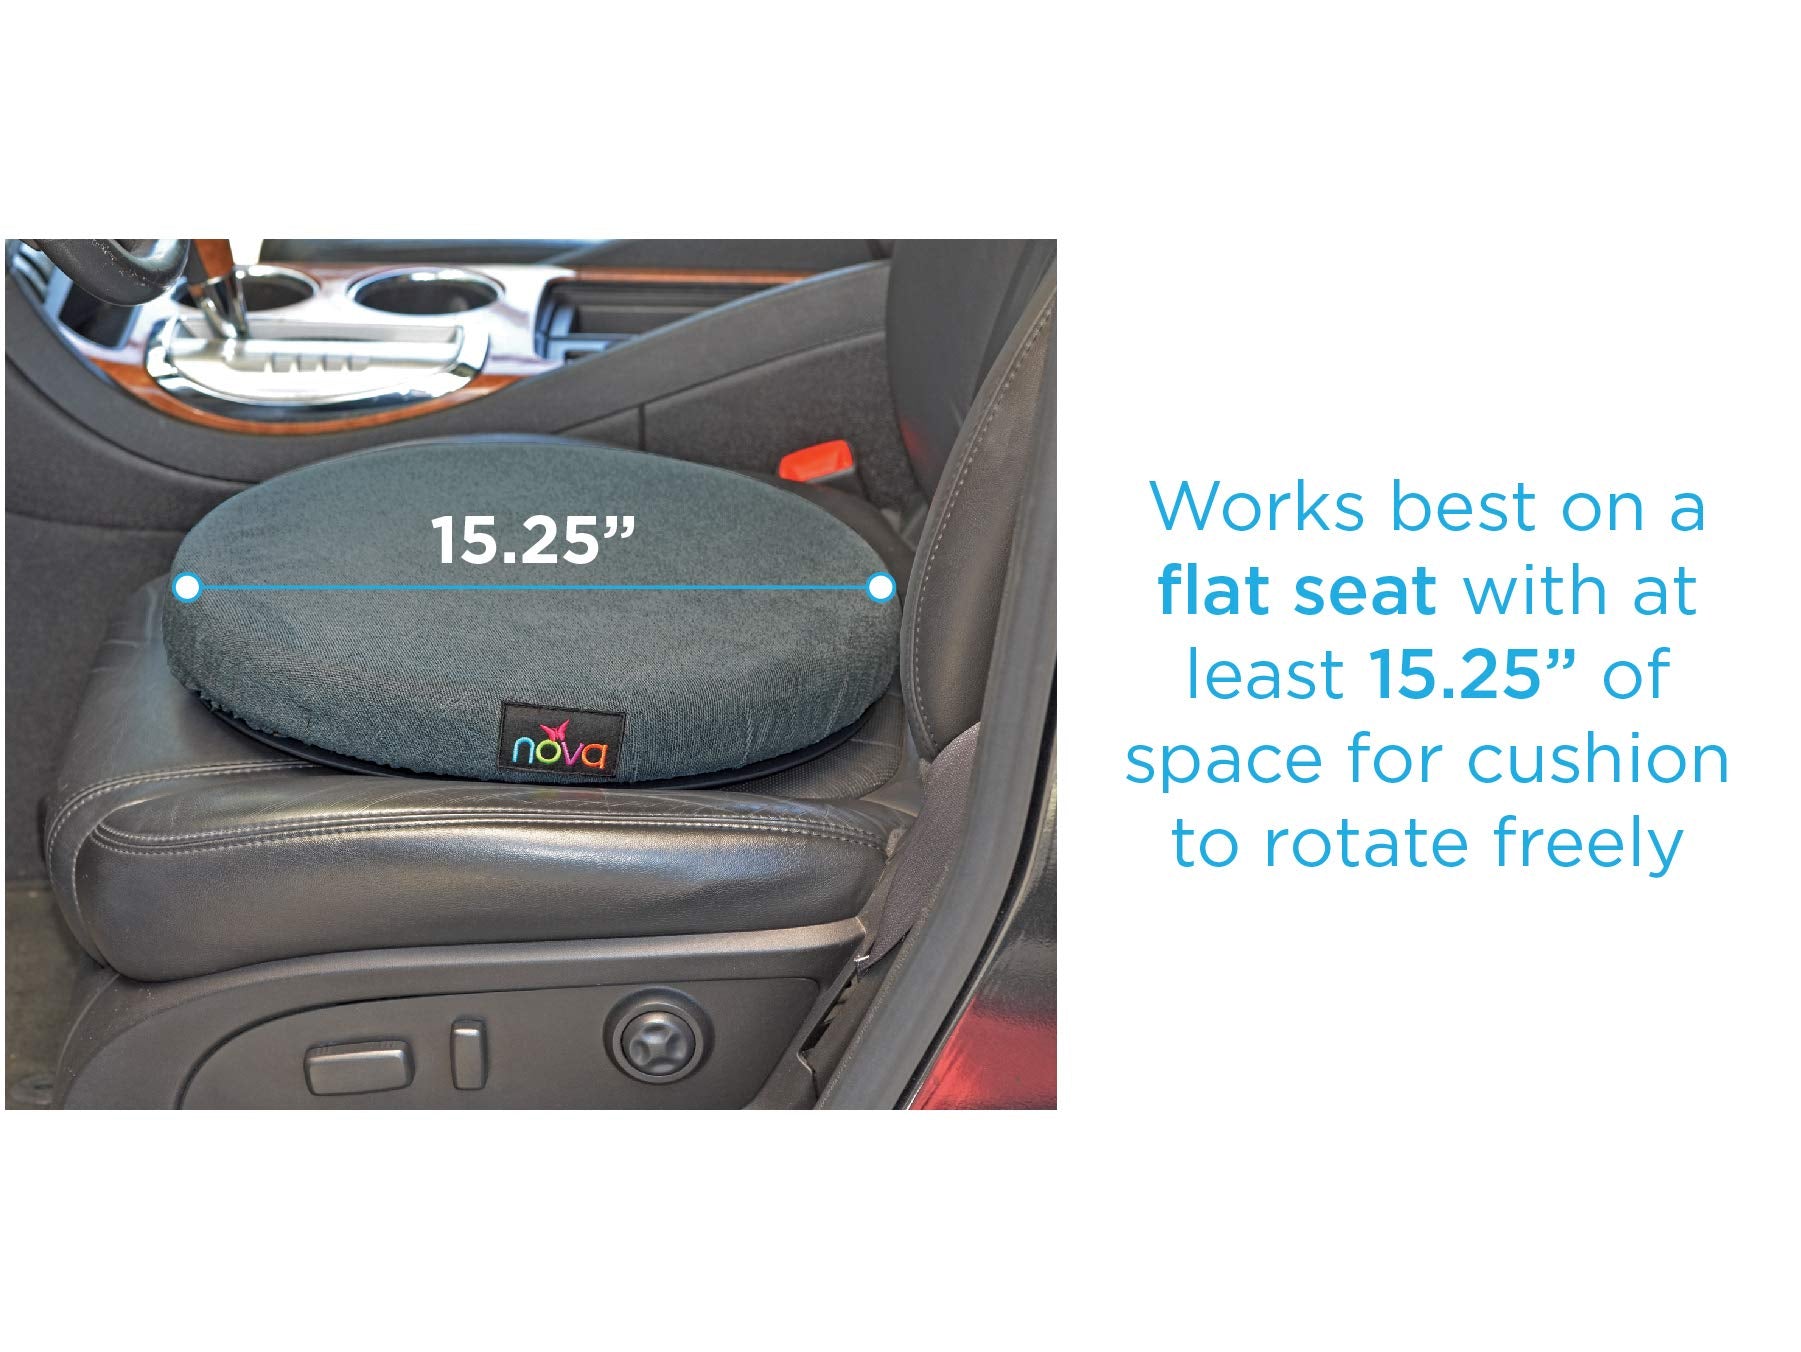 NOVA Swivel Seat Cushion for Car or Chair, 360 Degree Pivot Disc for Easy Transfer, 2? Thick Cushion with Removable Cover